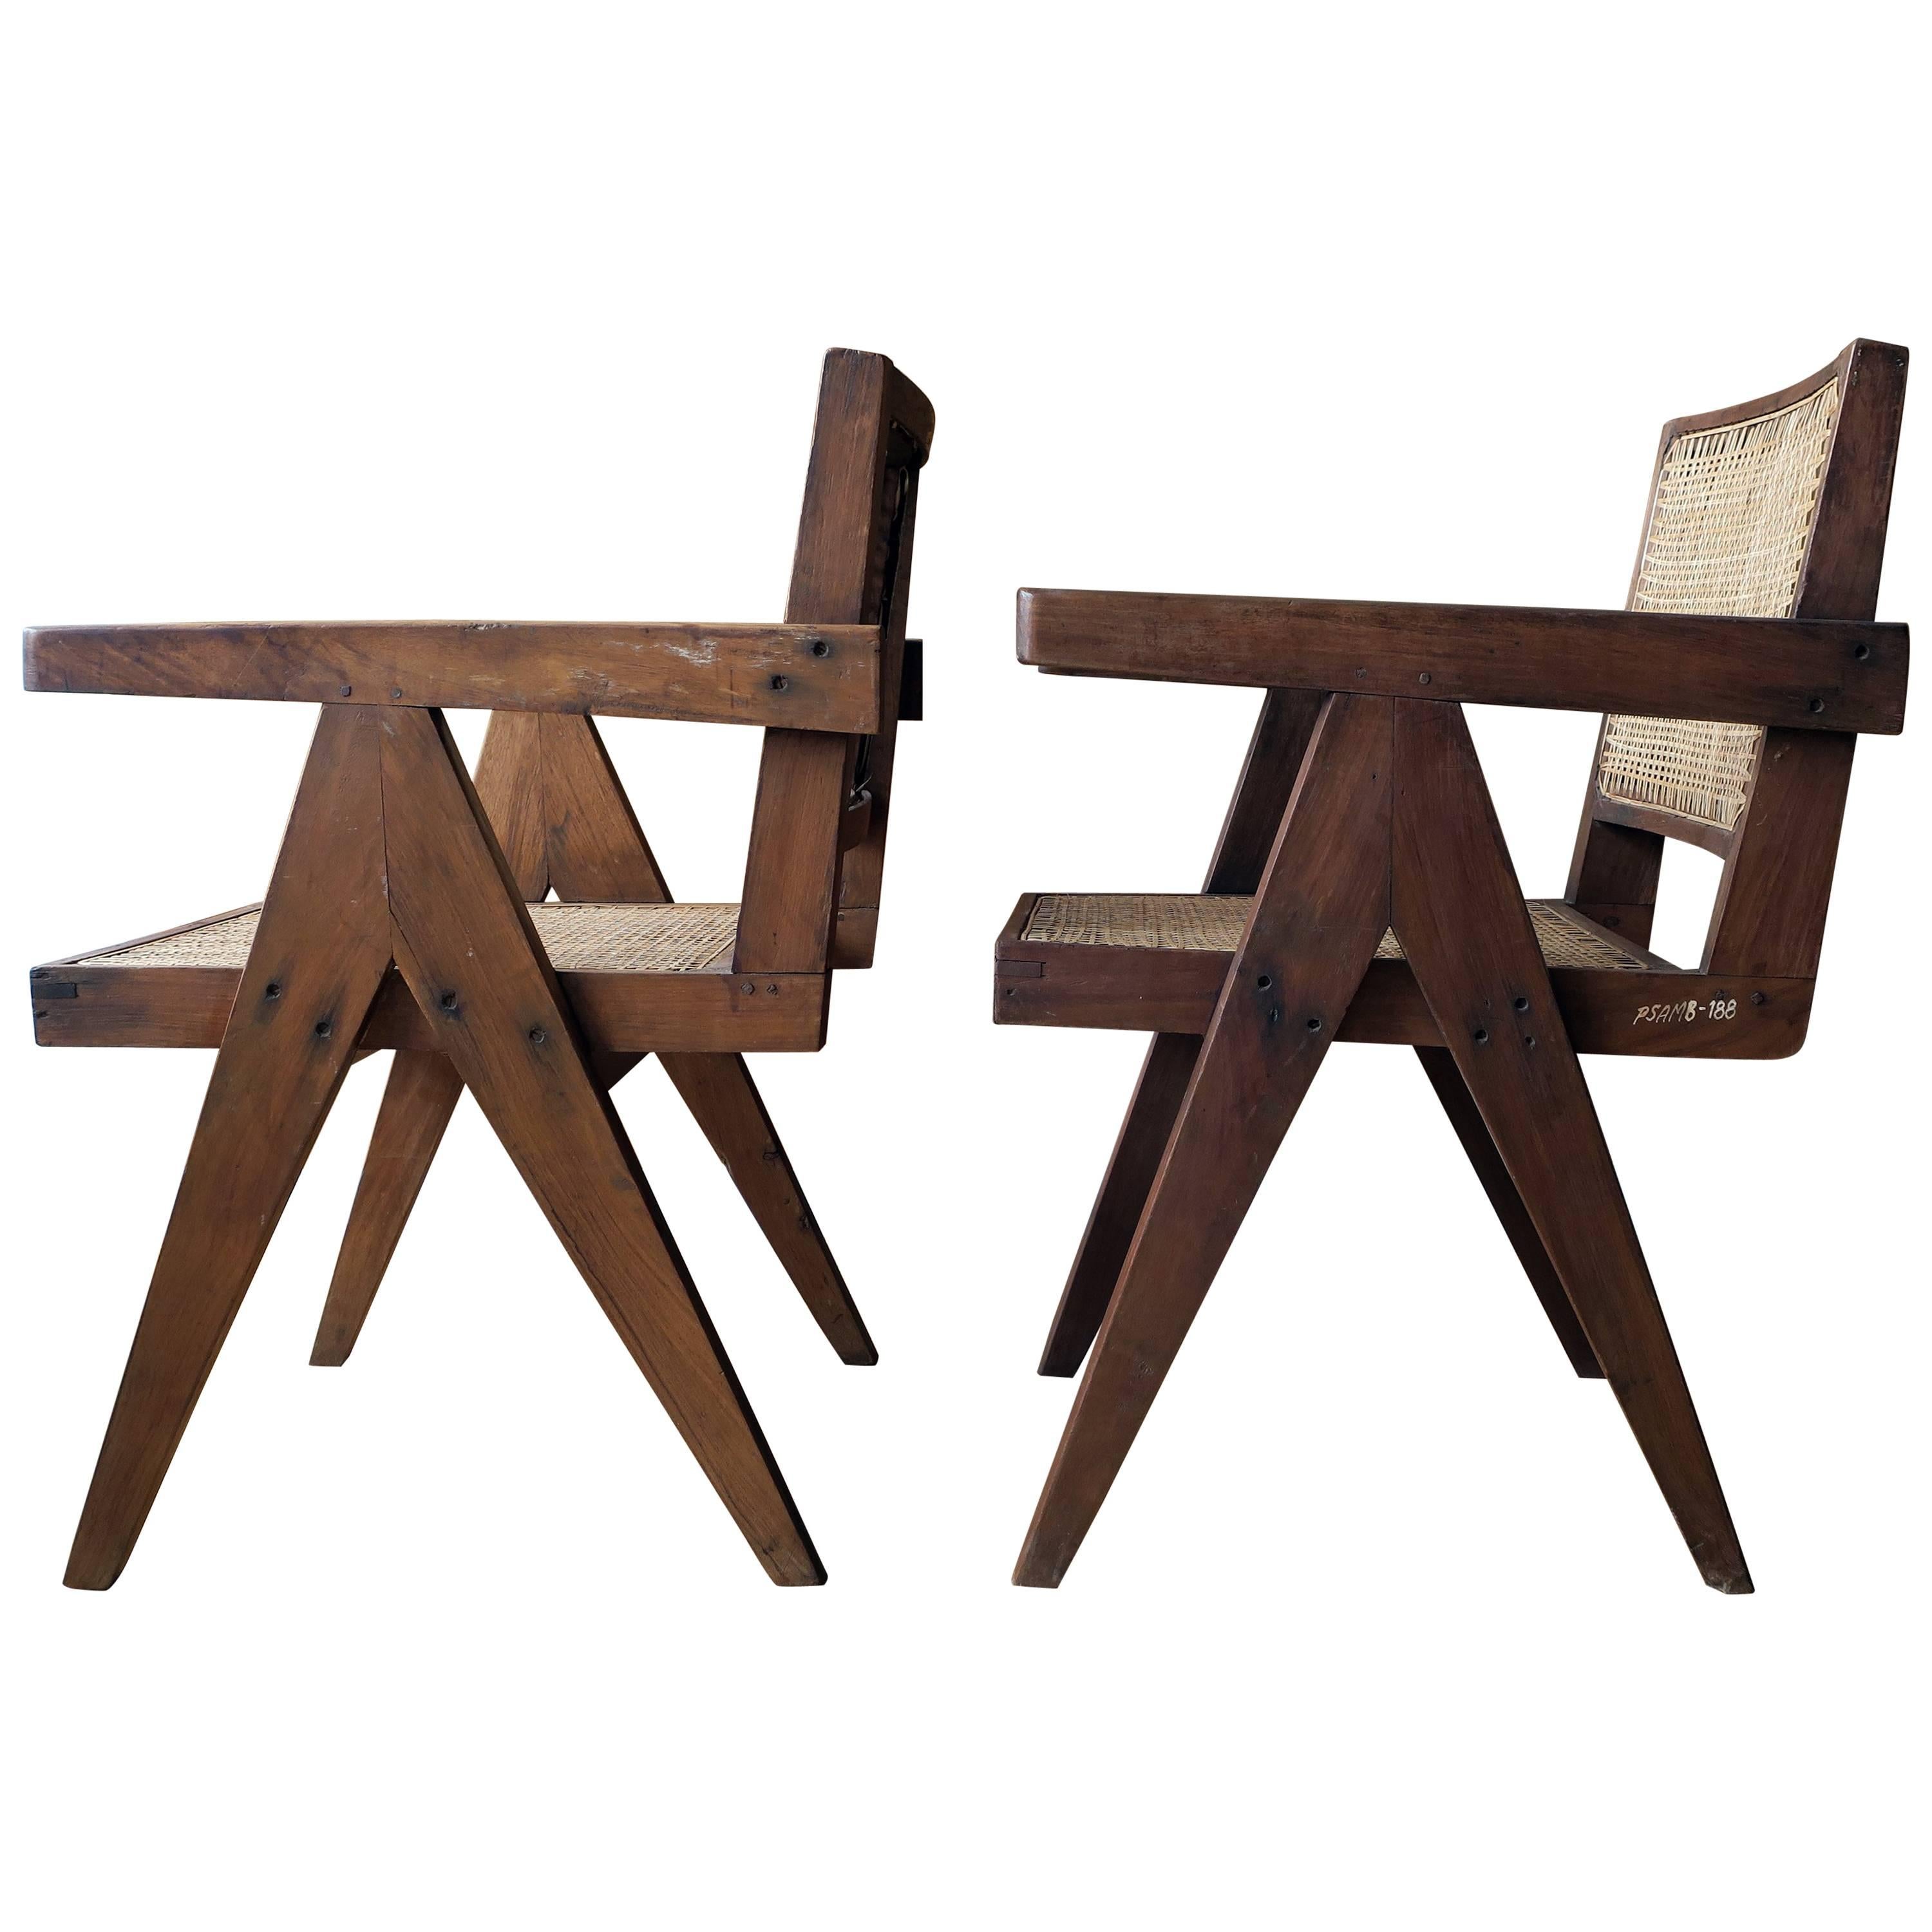 Pierre Jeanneret Pair of "V-Leg" Armchairs from Chandigarh